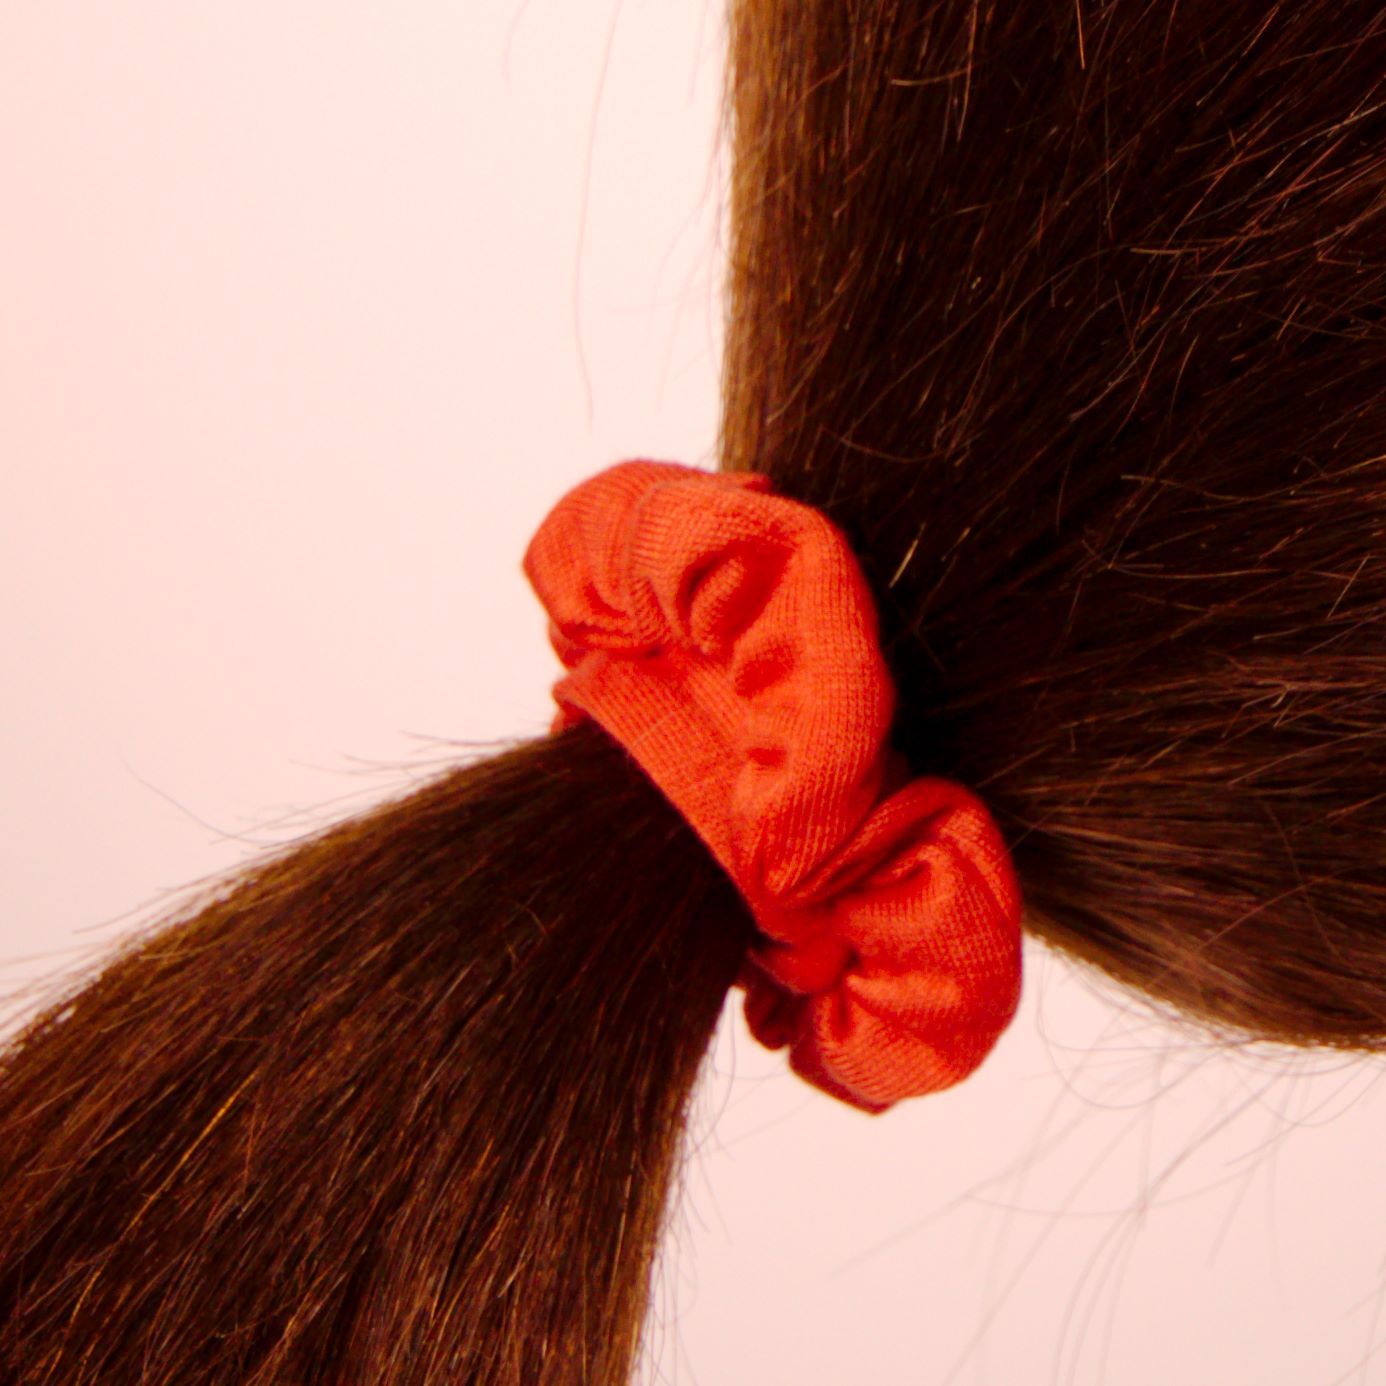 Amelia Beauty, Medium Red Jersey Scrunchies, 2.5in Diameter, Gentle on Hair, Strong Hold, No Snag, No Dents or Creases. 10 Pack